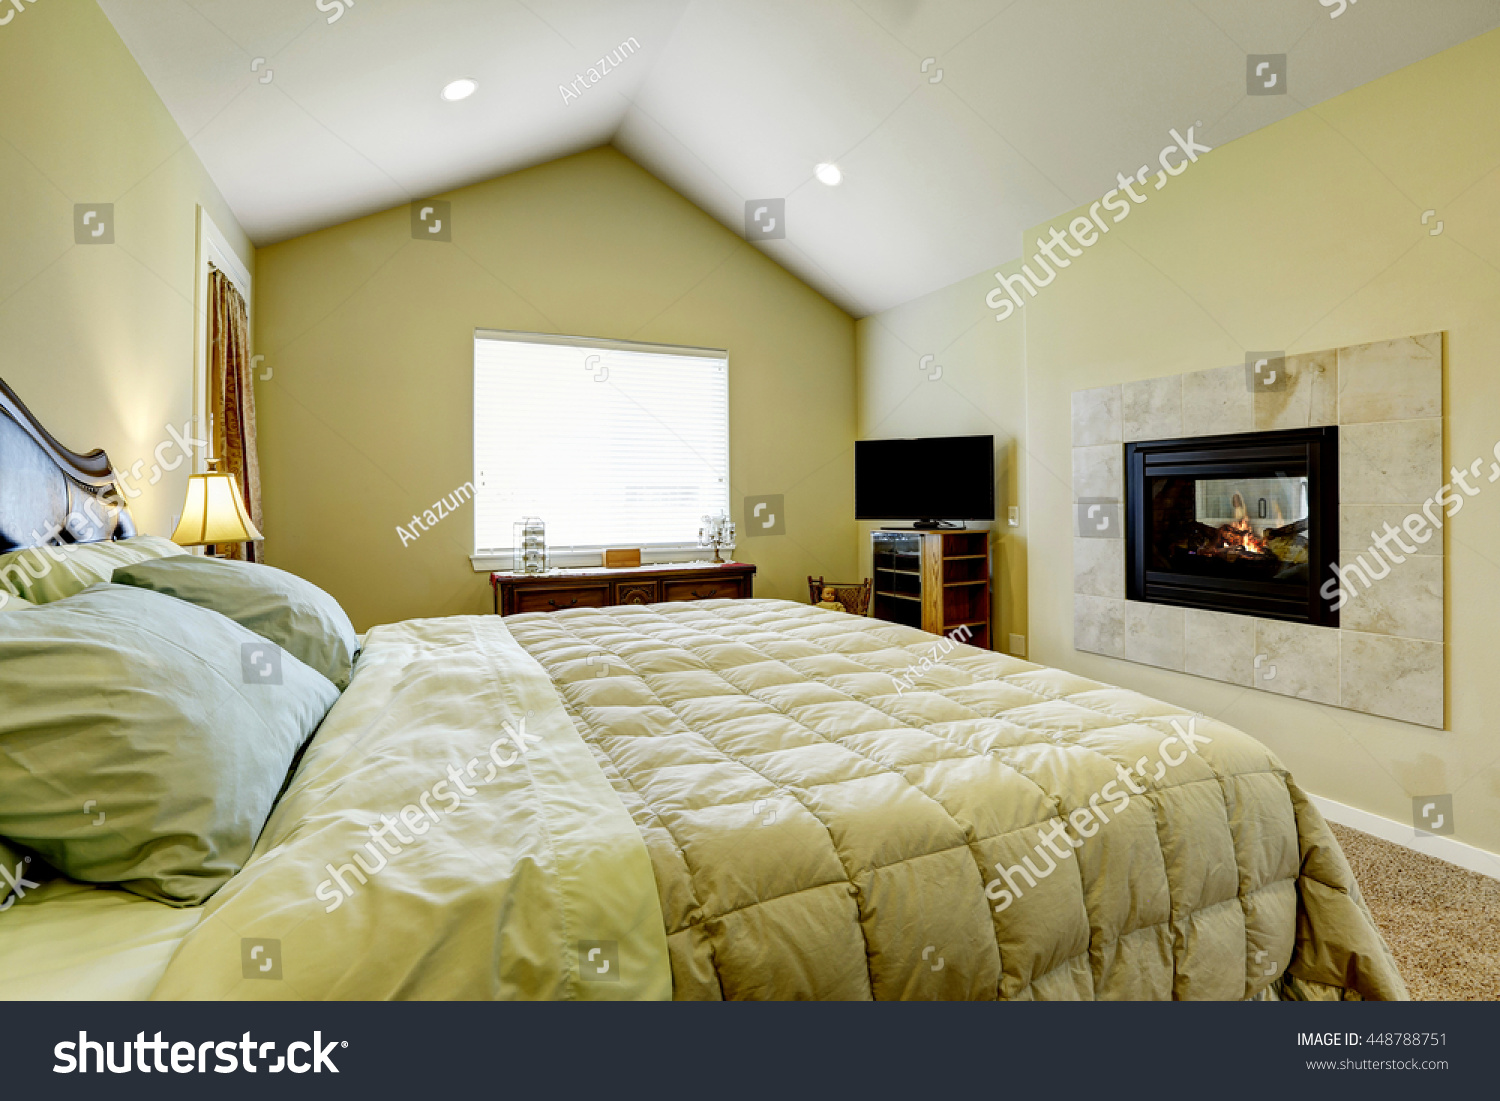 Master Bedroom Built Fireplace Vaulted Ceiling Stock Photo